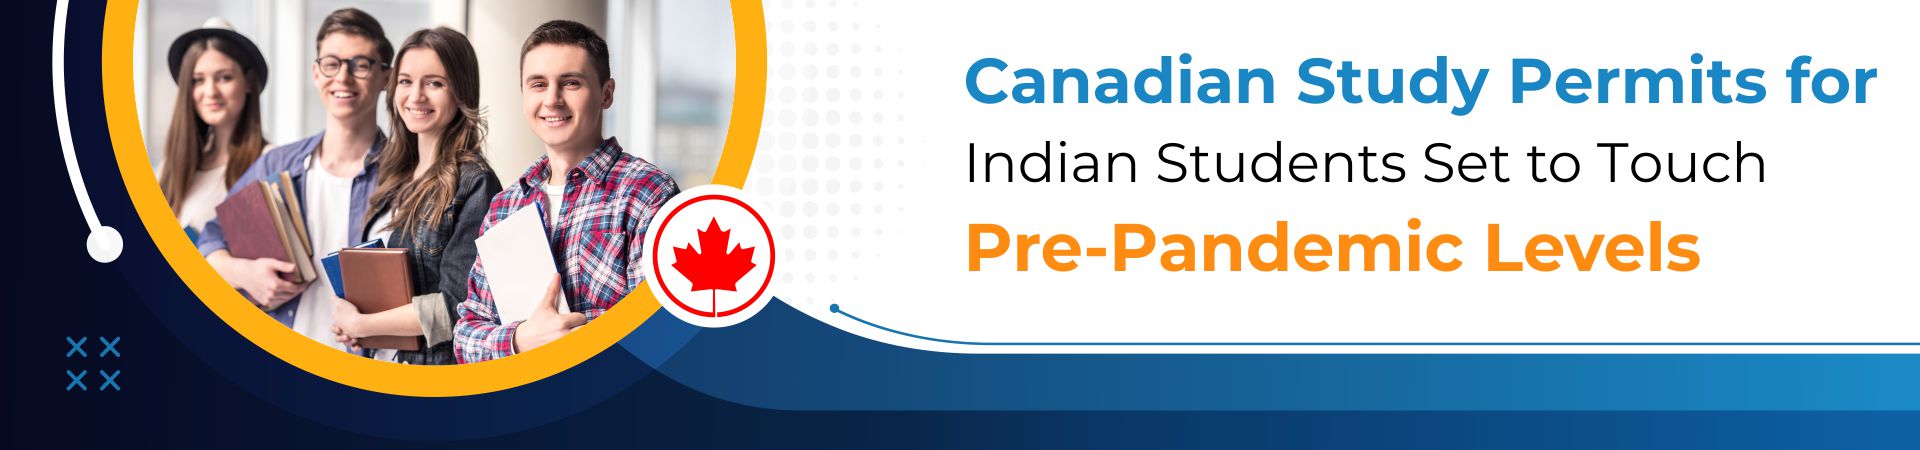 Canadian study permits for Indian students set to touch pre-pandemic levels